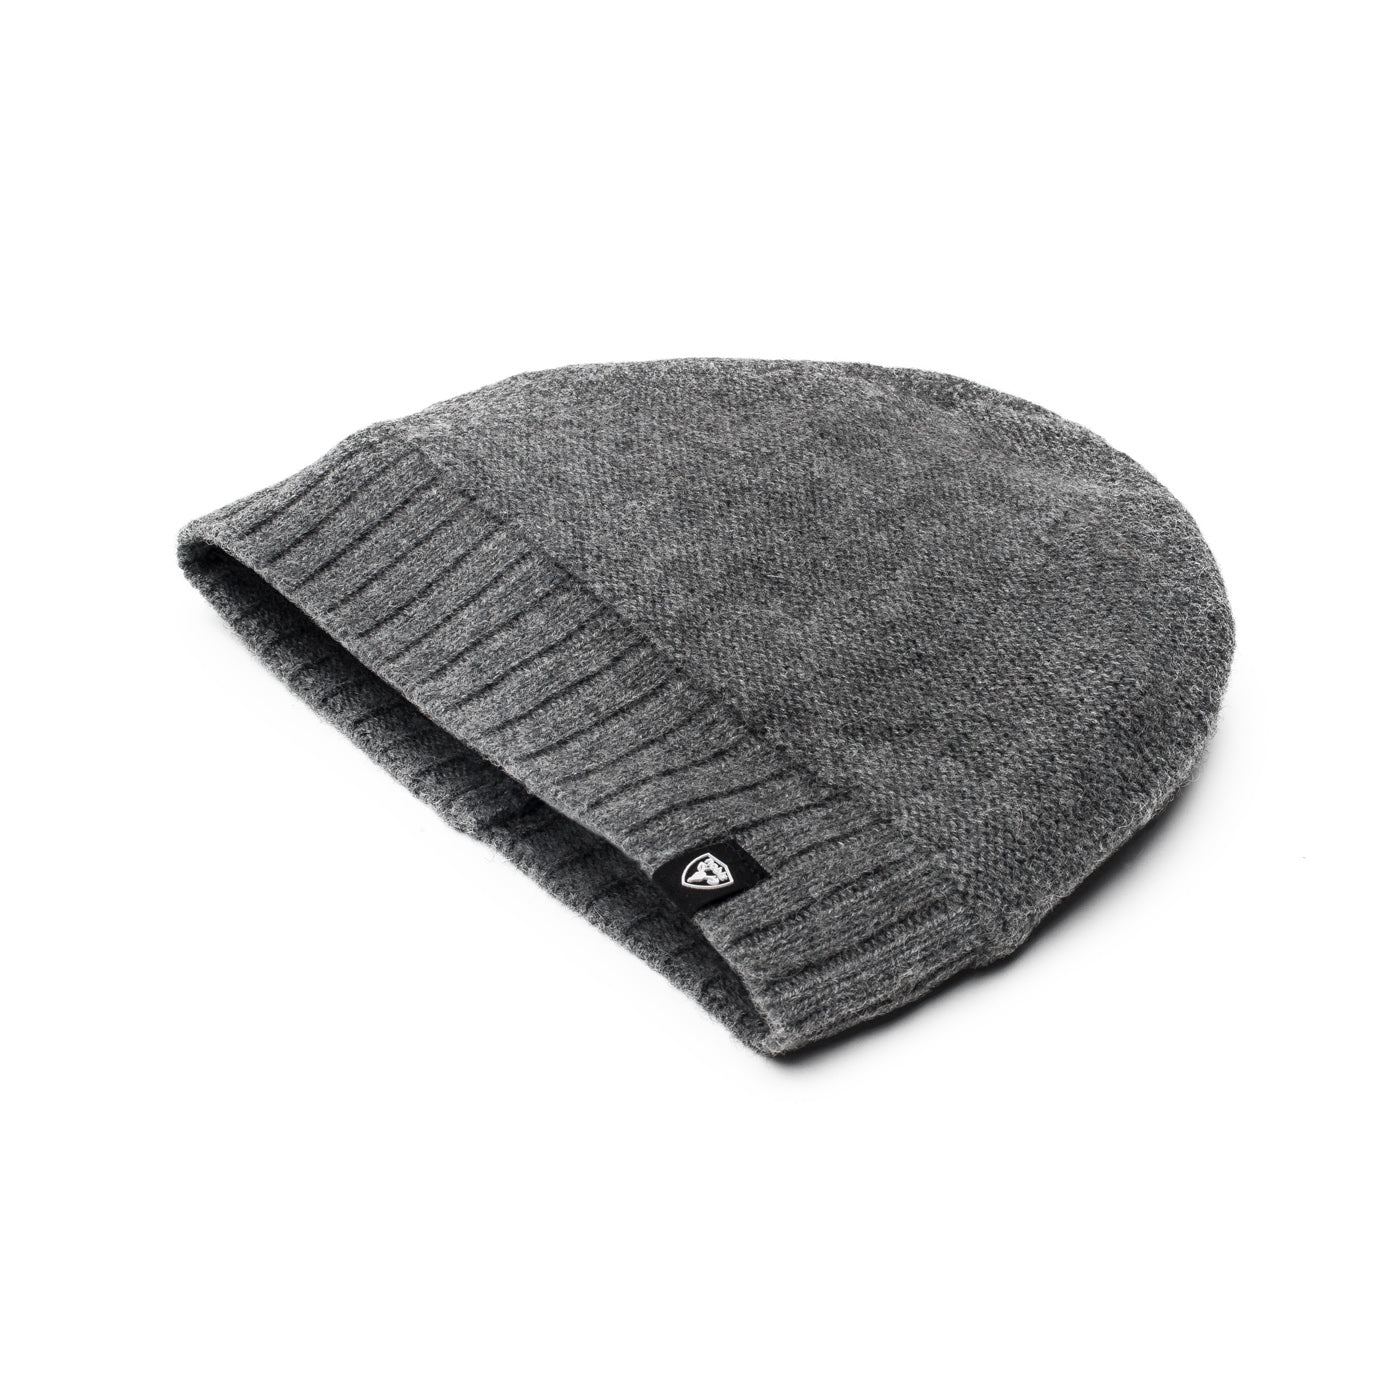 Men's ribbed knit toque in Grey Hair